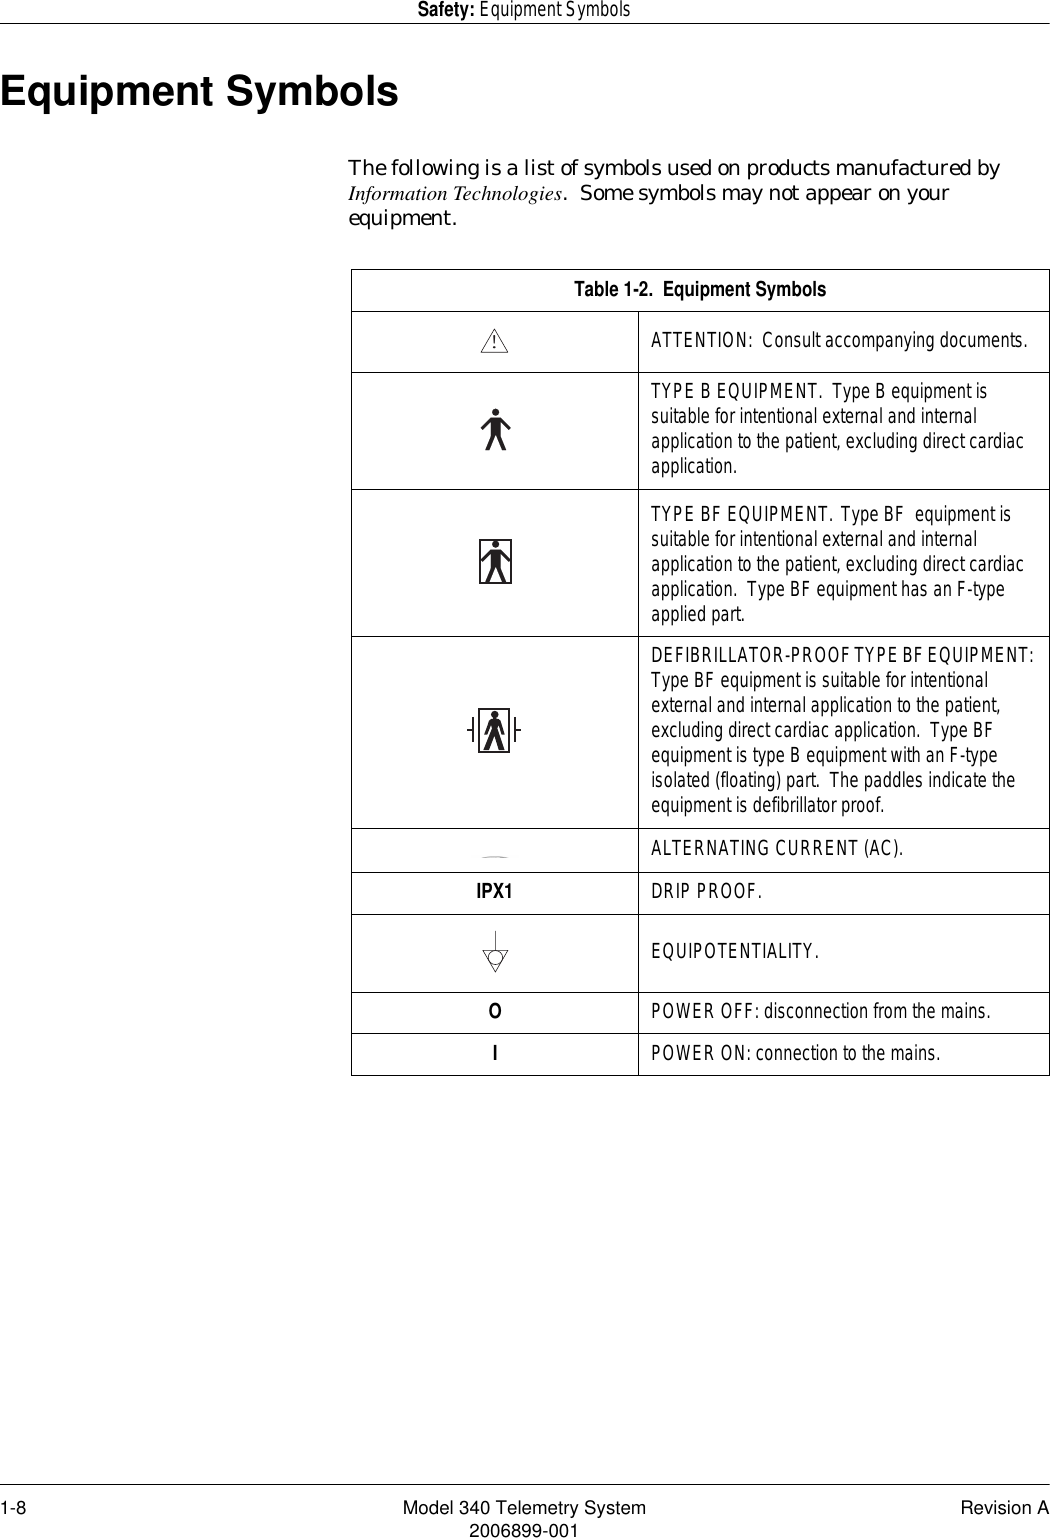 1-8 Model 340 Telemetry System Revision A2006899-001Safety: Equipment SymbolsEquipment SymbolsThe following is a list of symbols used on products manufactured by Information Technologies.  Some symbols may not appear on your equipment.Table 1-2.  Equipment SymbolsATTENTION:  Consult accompanying documents.TYPE B EQUIPMENT.  Type B equipment is suitable for intentional external and internal application to the patient, excluding direct cardiac application.TYPE BF EQUIPMENT.  Type BF  equipment is suitable for intentional external and internal application to the patient, excluding direct cardiac application.  Type BF equipment has an F-type applied part.DEFIBRILLATOR-PROOF TYPE BF EQUIPMENT: Type BF equipment is suitable for intentional external and internal application to the patient, excluding direct cardiac application.  Type BF equipment is type B equipment with an F-type isolated (floating) part.  The paddles indicate the equipment is defibrillator proof.ALTERNATING CURRENT (AC).IPX1 DRIP PROOF.EQUIPOTENTIALITY.OPOWER OFF: disconnection from the mains.IPOWER ON: connection to the mains.!